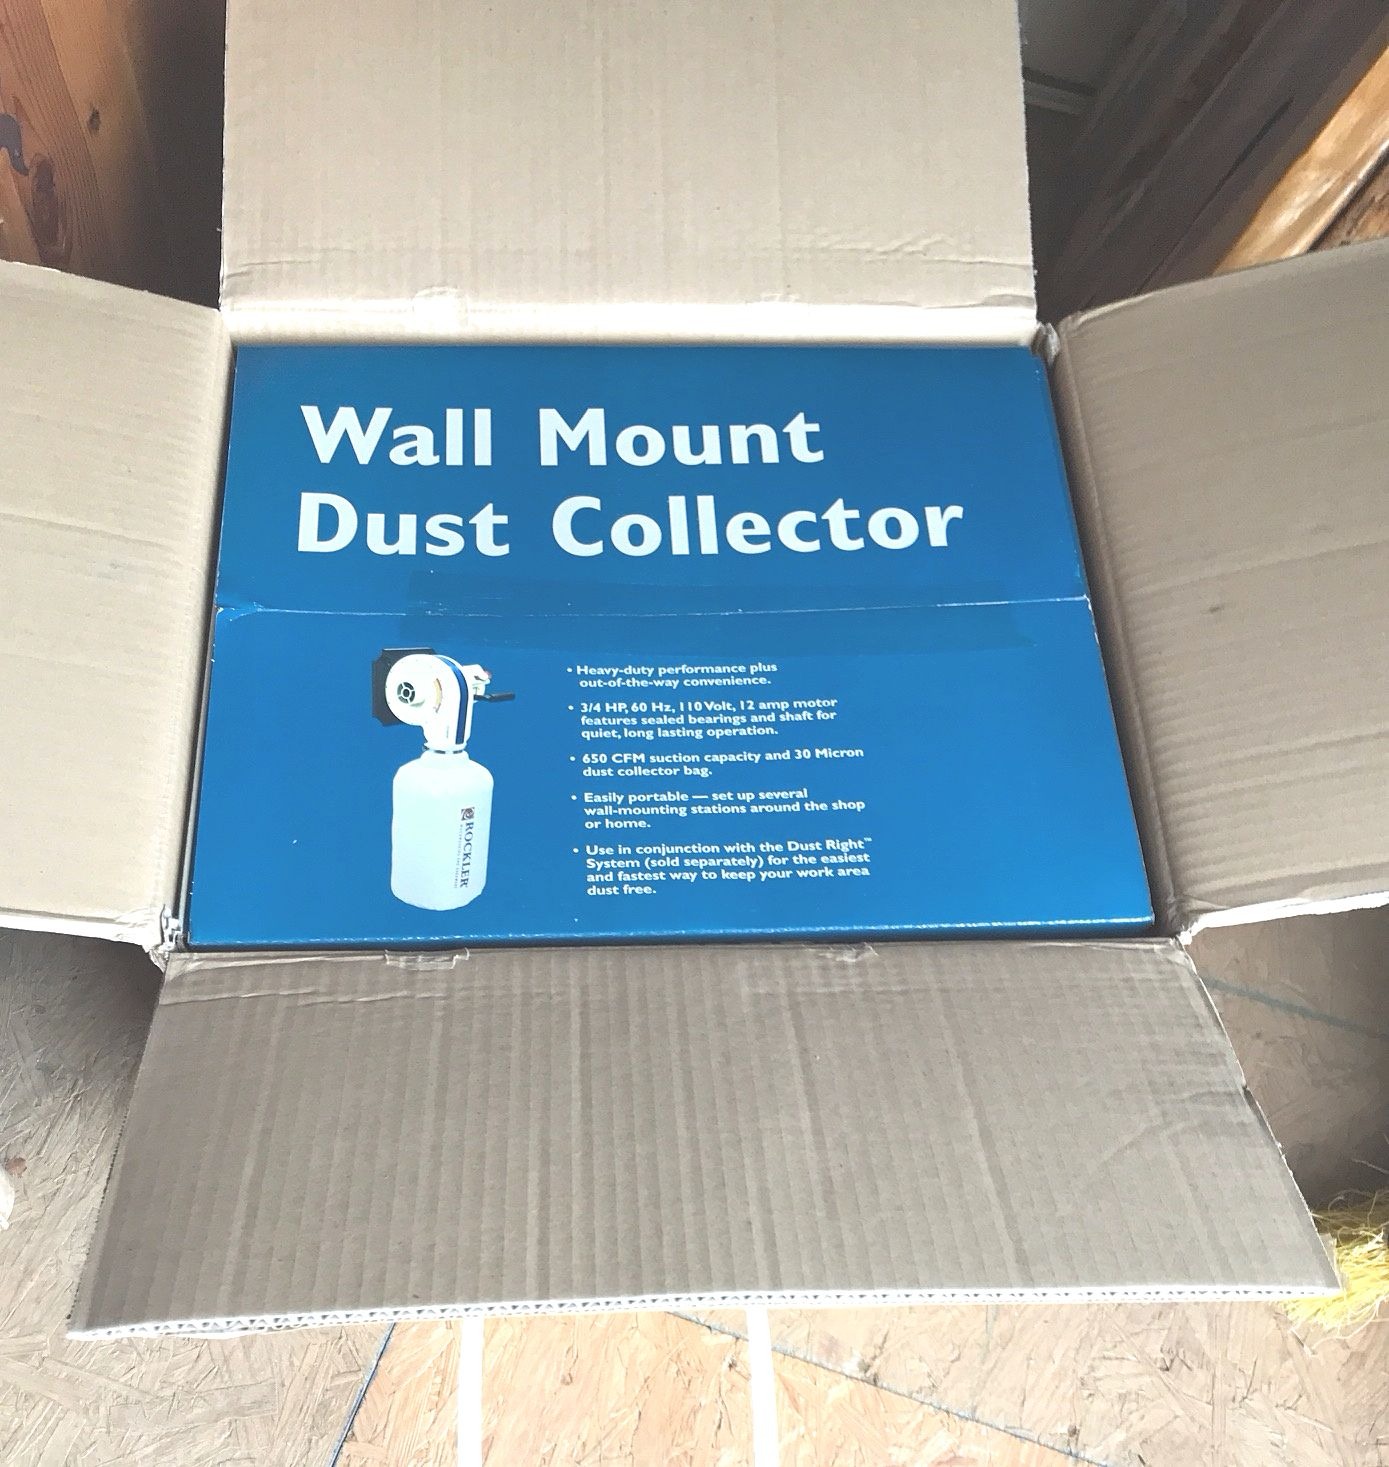 Wall Mount Dust Collector (used) Item # UFE-2998 (Oklahoma)